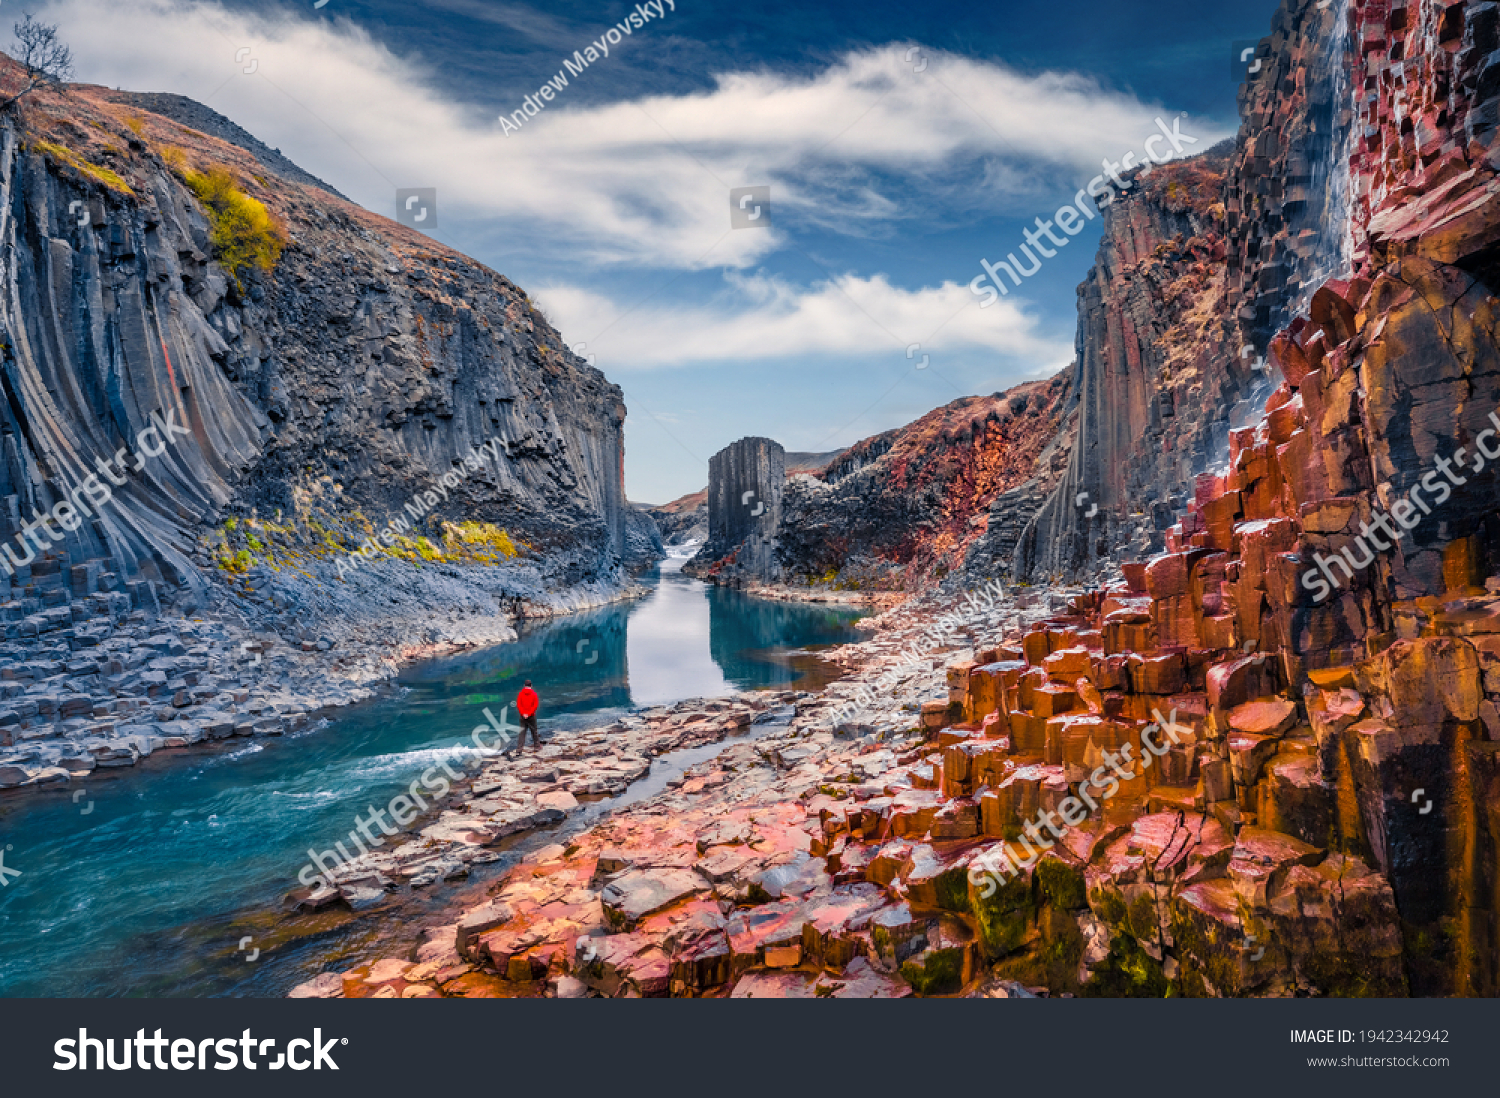 Tourist walking on the bottom of canyon with basalt columns. Unbelievable summer scene of Studlagil Canyon. Picturesque morning view of Iceland, Europe. Beauty of nature concept background. #1942342942